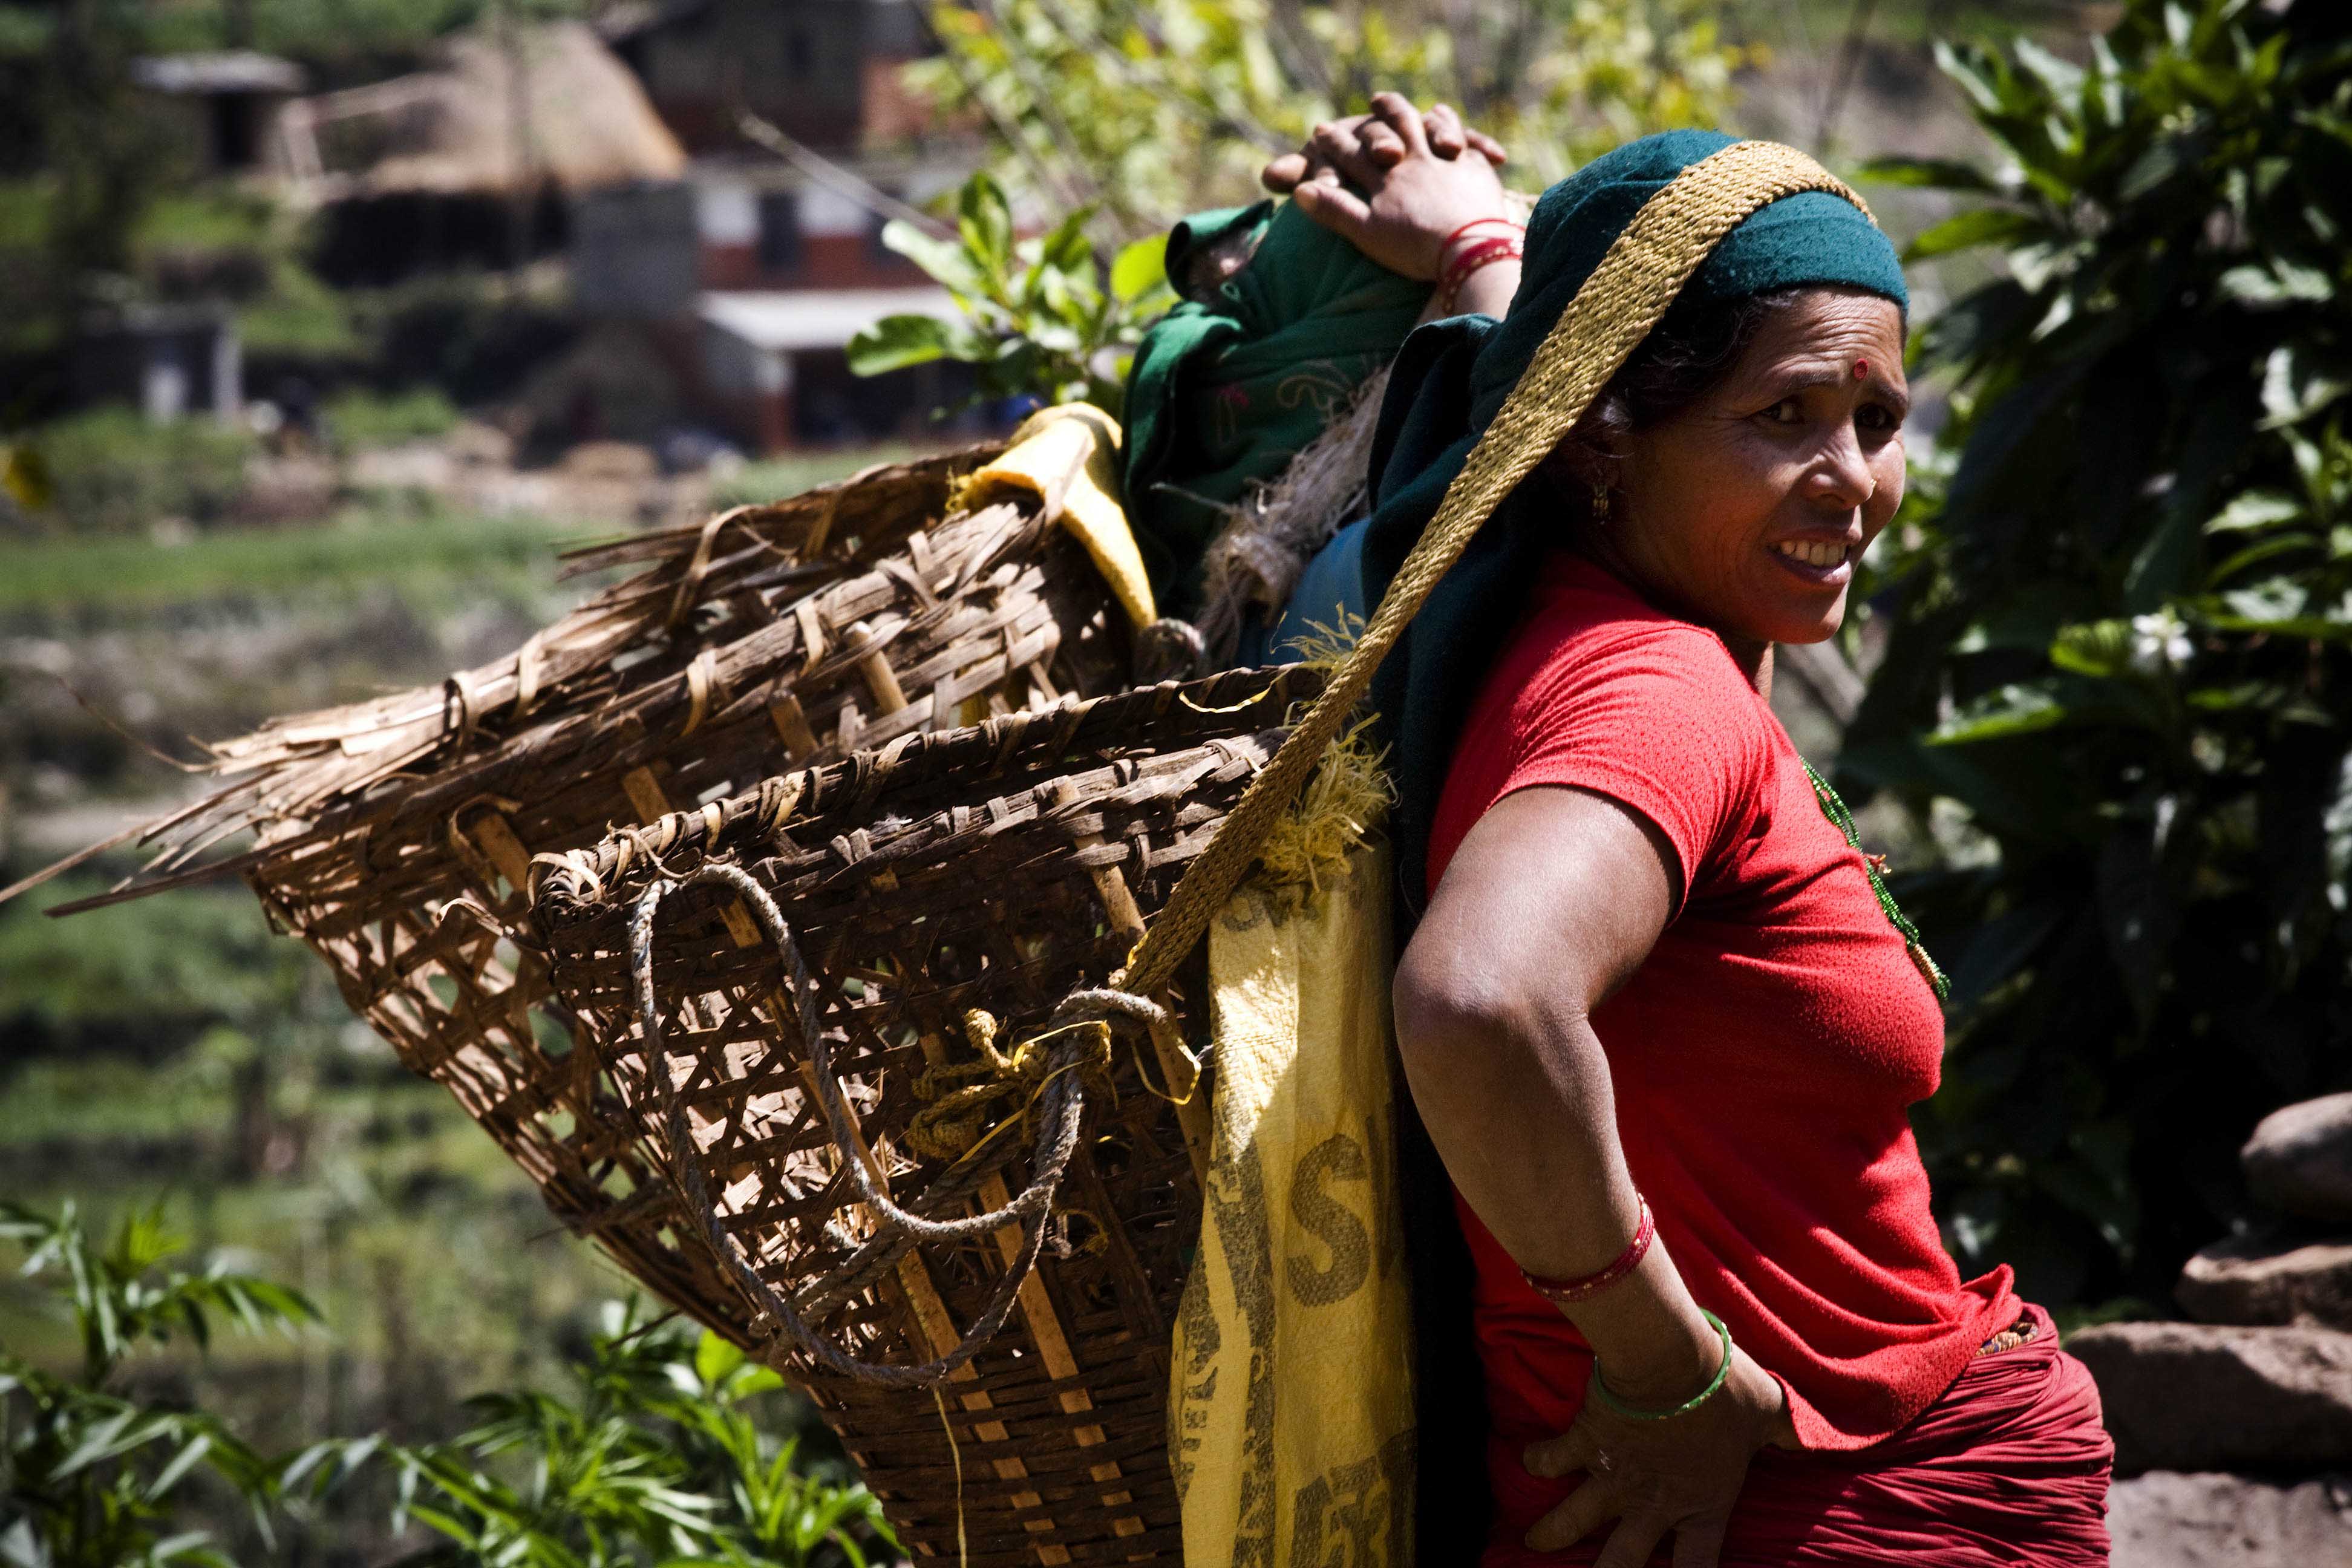 Women’s Empowerment in Agriculture, Production Diversity and Nutrition